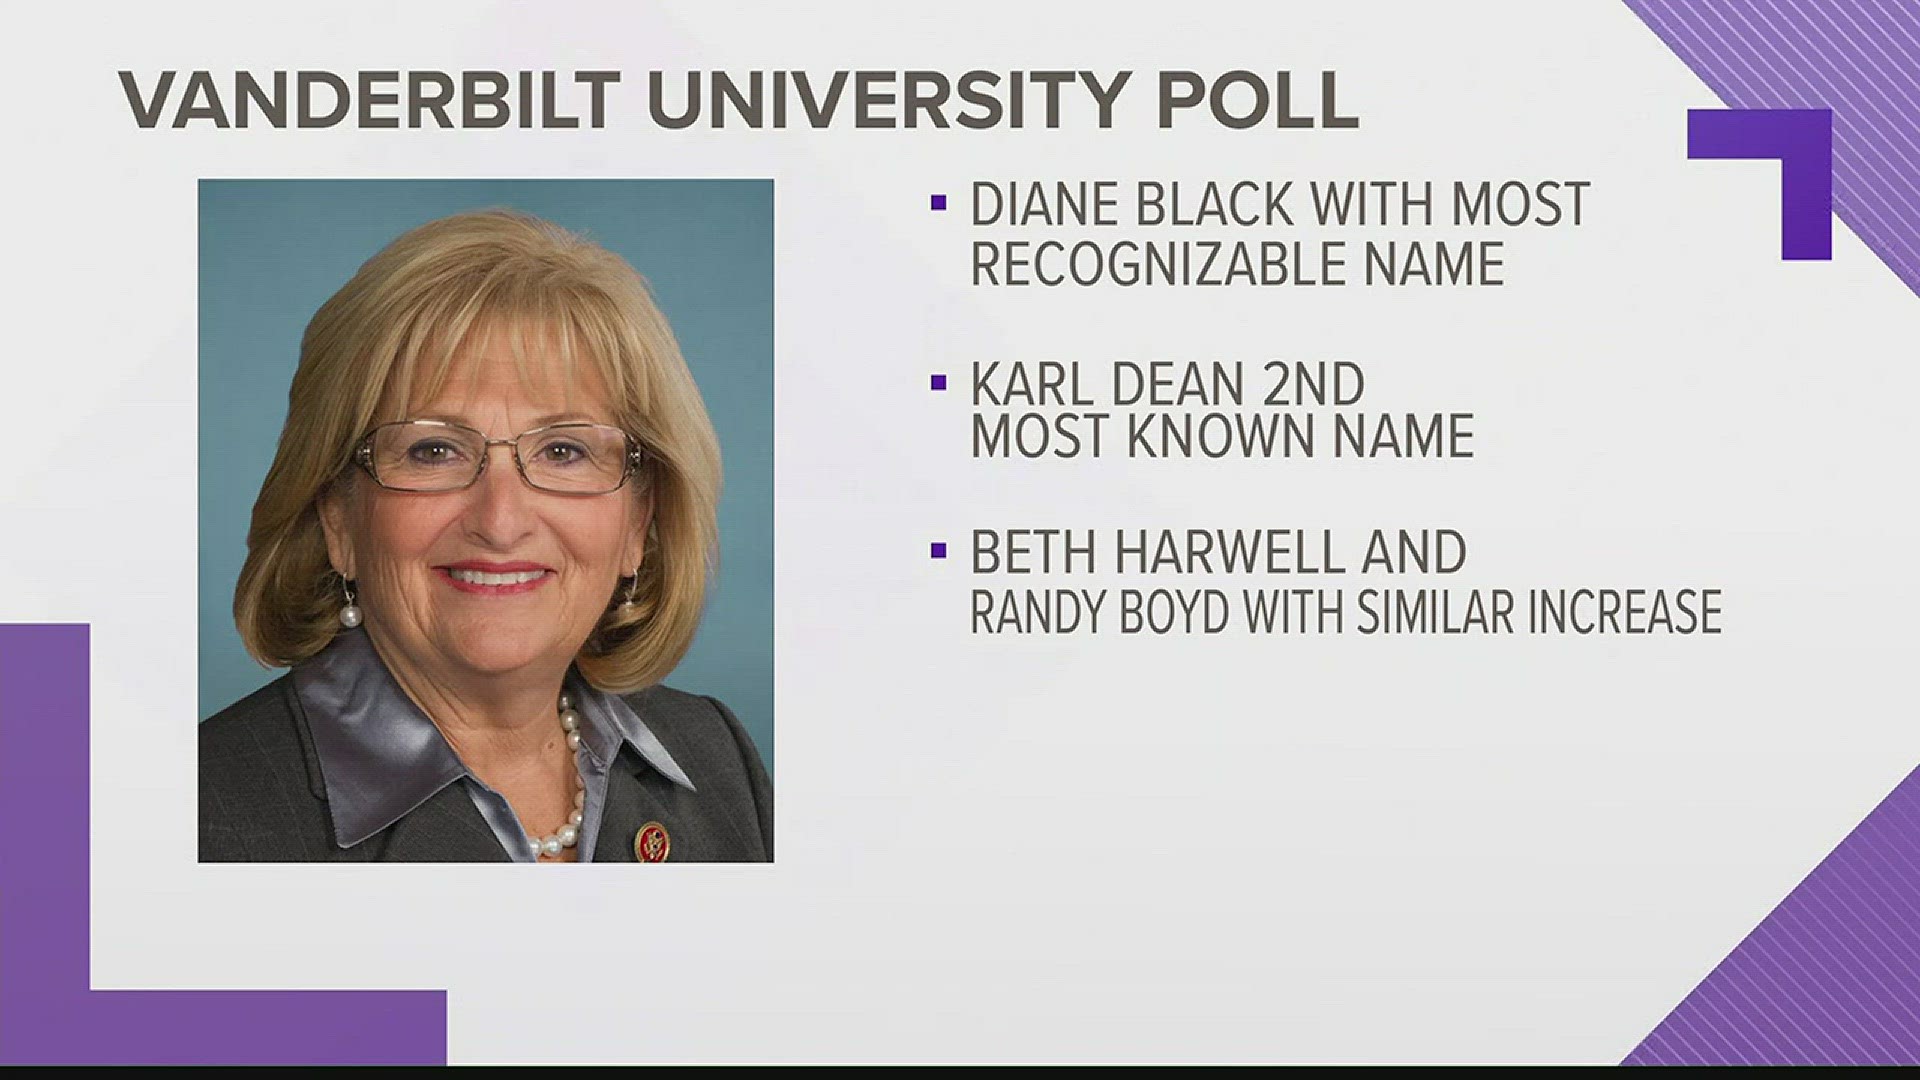 Dec. 14, 2017: U.S. Rep. Diane Black has the most recognizable name in the 2018 race for Tennessee governor, according to a new poll from Vanderbilt University.